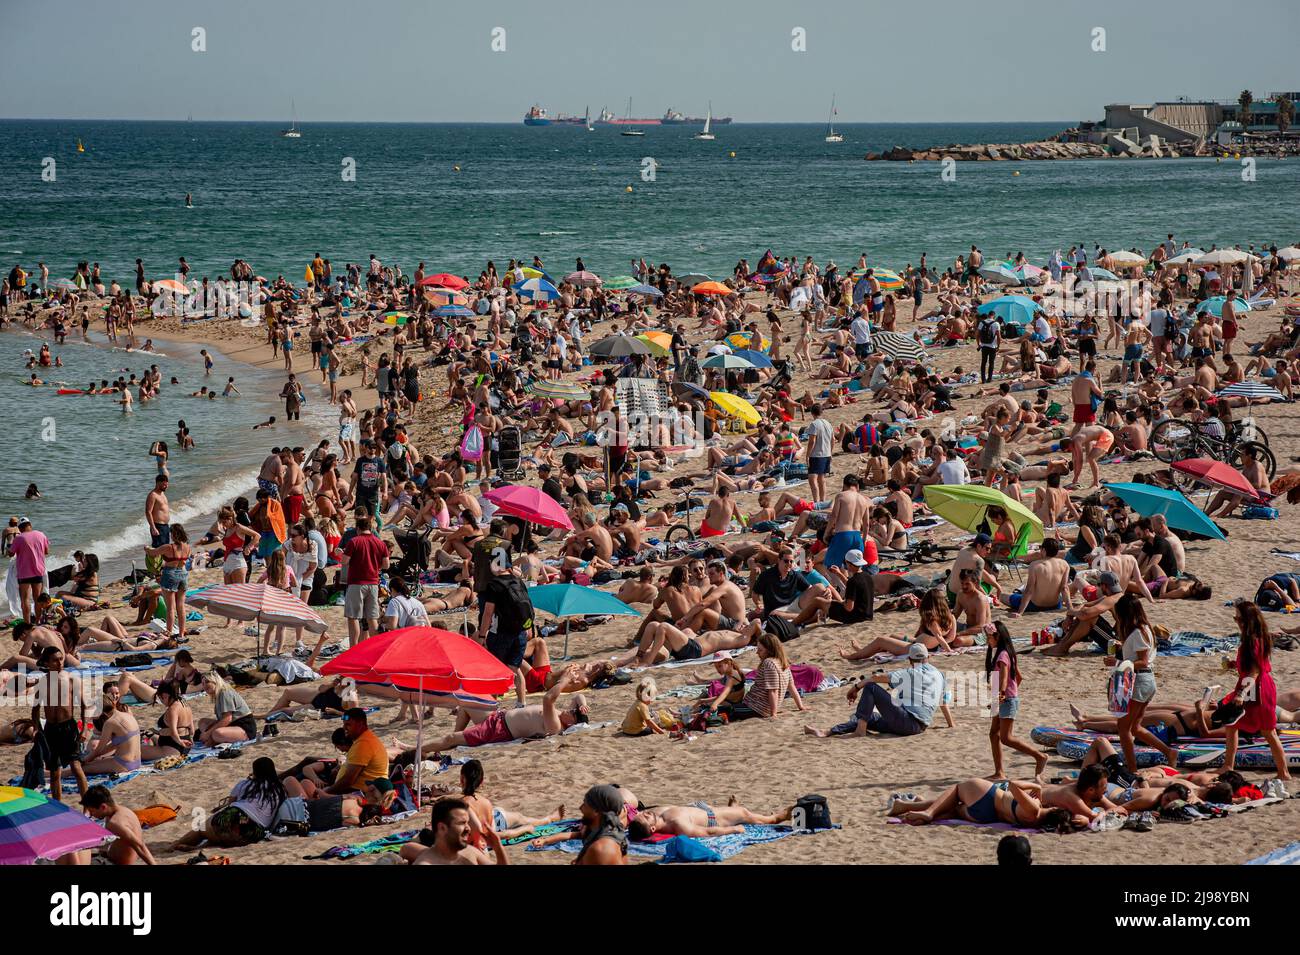 Barcelona, Spain. May 21, 2022. People crowds and cool off at La Barceloneta beach in Barcelona amid a heatwave affecting the Iberian Peninsula that is reaching record and unusual temperatures for this time of year. Credit:  Jordi Boixareu/Alamy Live News Stock Photo